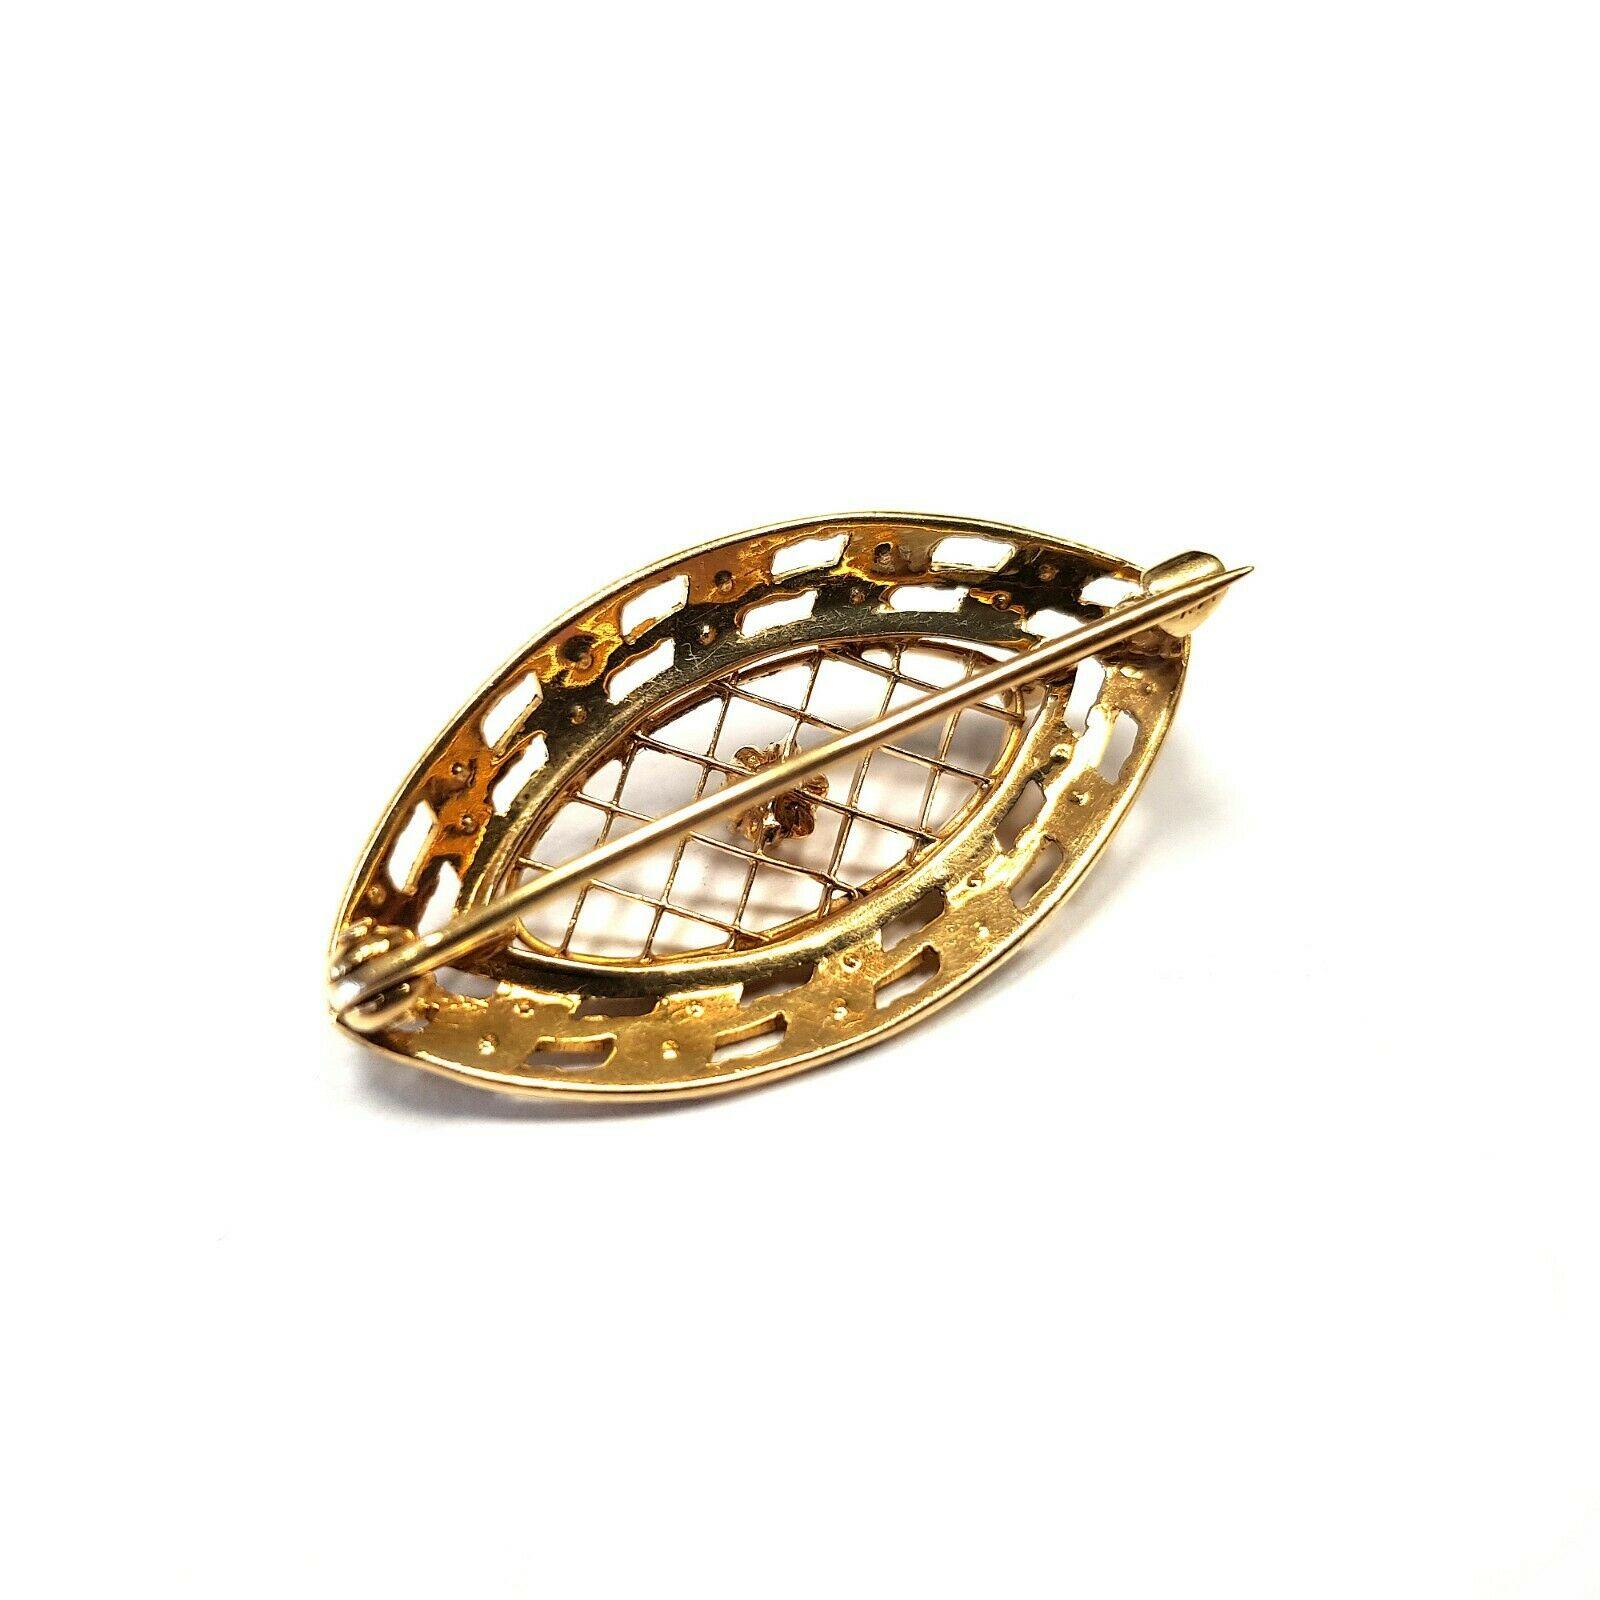  This is a 14k yellow gold shield brooch with very tiny pearls and round diamond 0.08ct. Looks elegant. 
Specifications:
    main stone: TINY PEARLS
    additional: DIAMOND
    diamonds: 1 PCS
    carat total weight: 0.08
    color: G
    clarity: